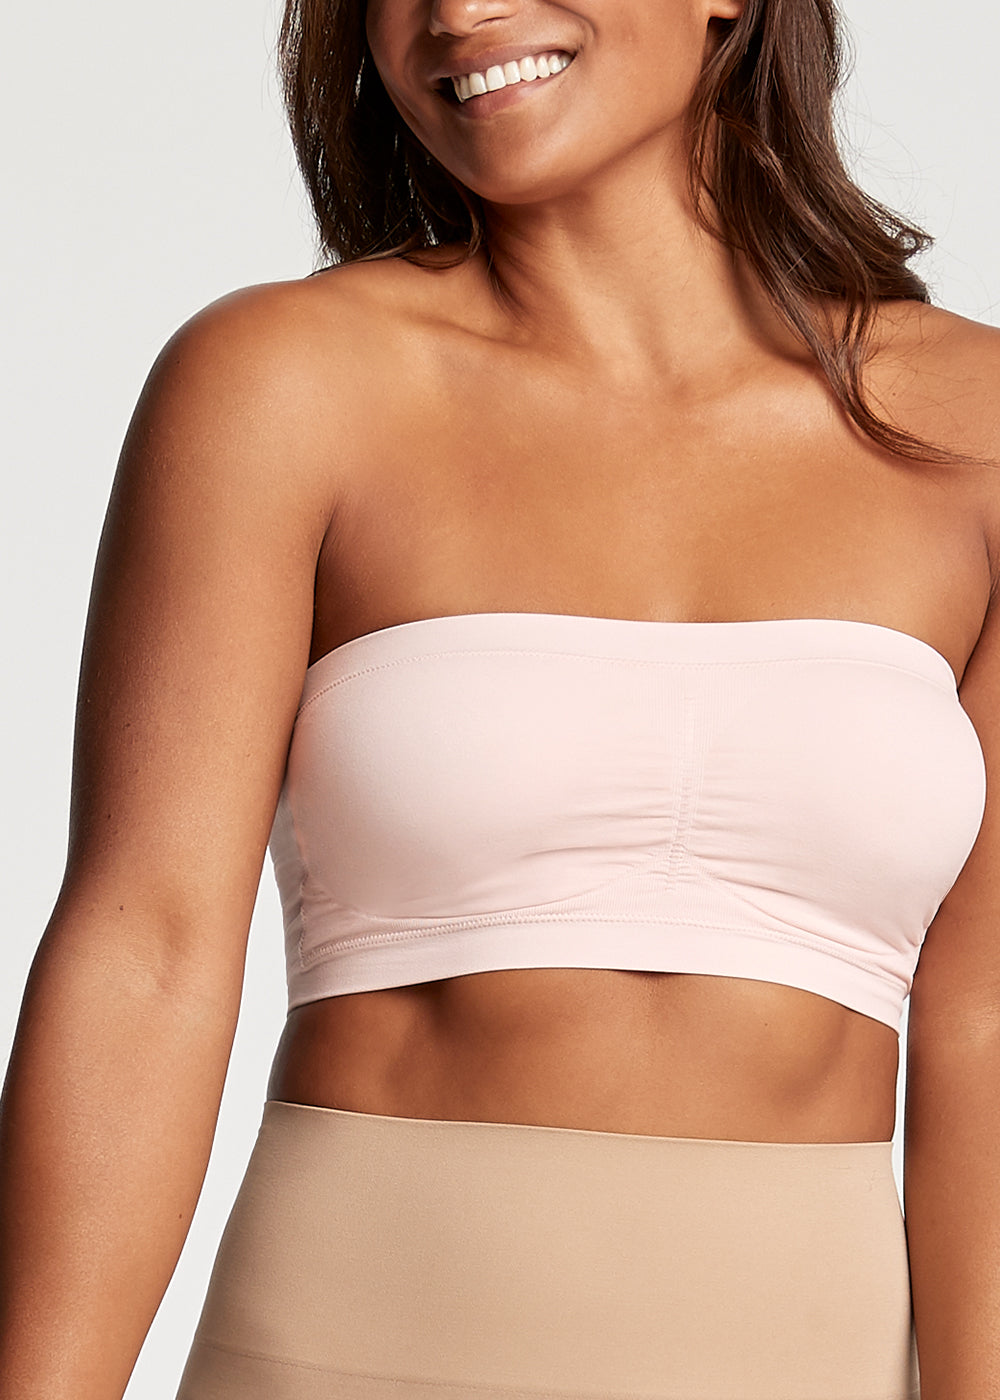 Bandeau Bra - Seamless from Yummie in Lotus  - 1